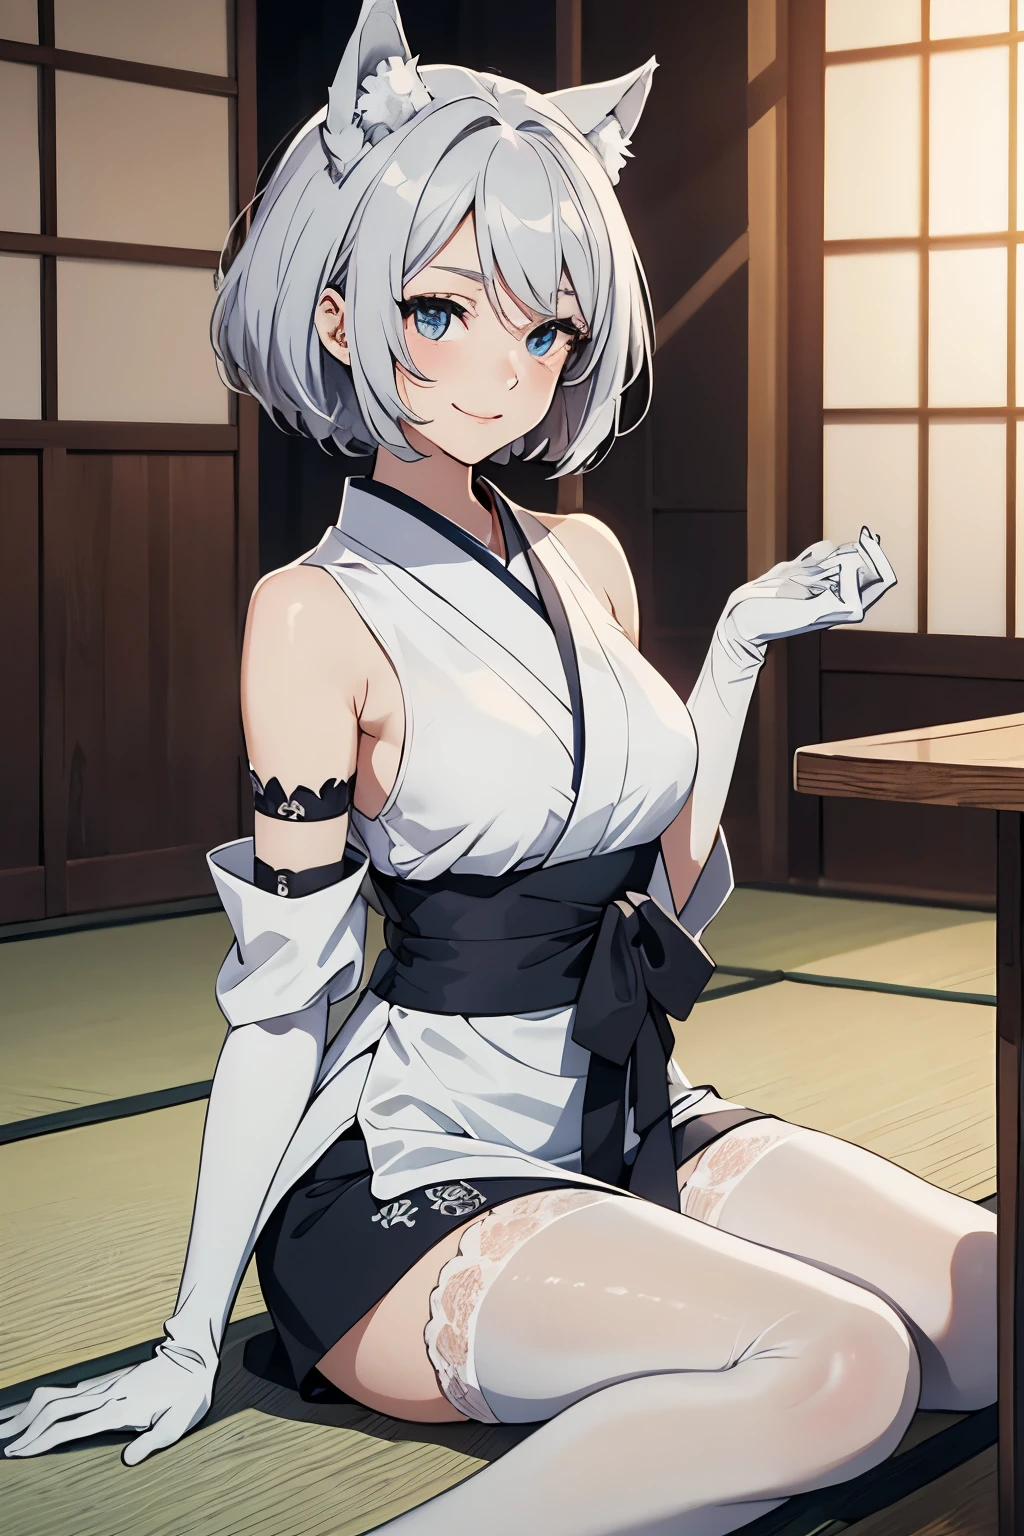 table top　 best image quality　wonderful　high detail　One Young Woman（（adult））anime style　white kimono（sleeveless）　Put your arm out　white long gloves（elbow gloves）　white pantyhose　wolf ears　short hair（（shortcut）（gray hair）（curly hair）（fluffy））　smile（Happy）　eye color is blue　Japanese style room（tatami）　girl sitting